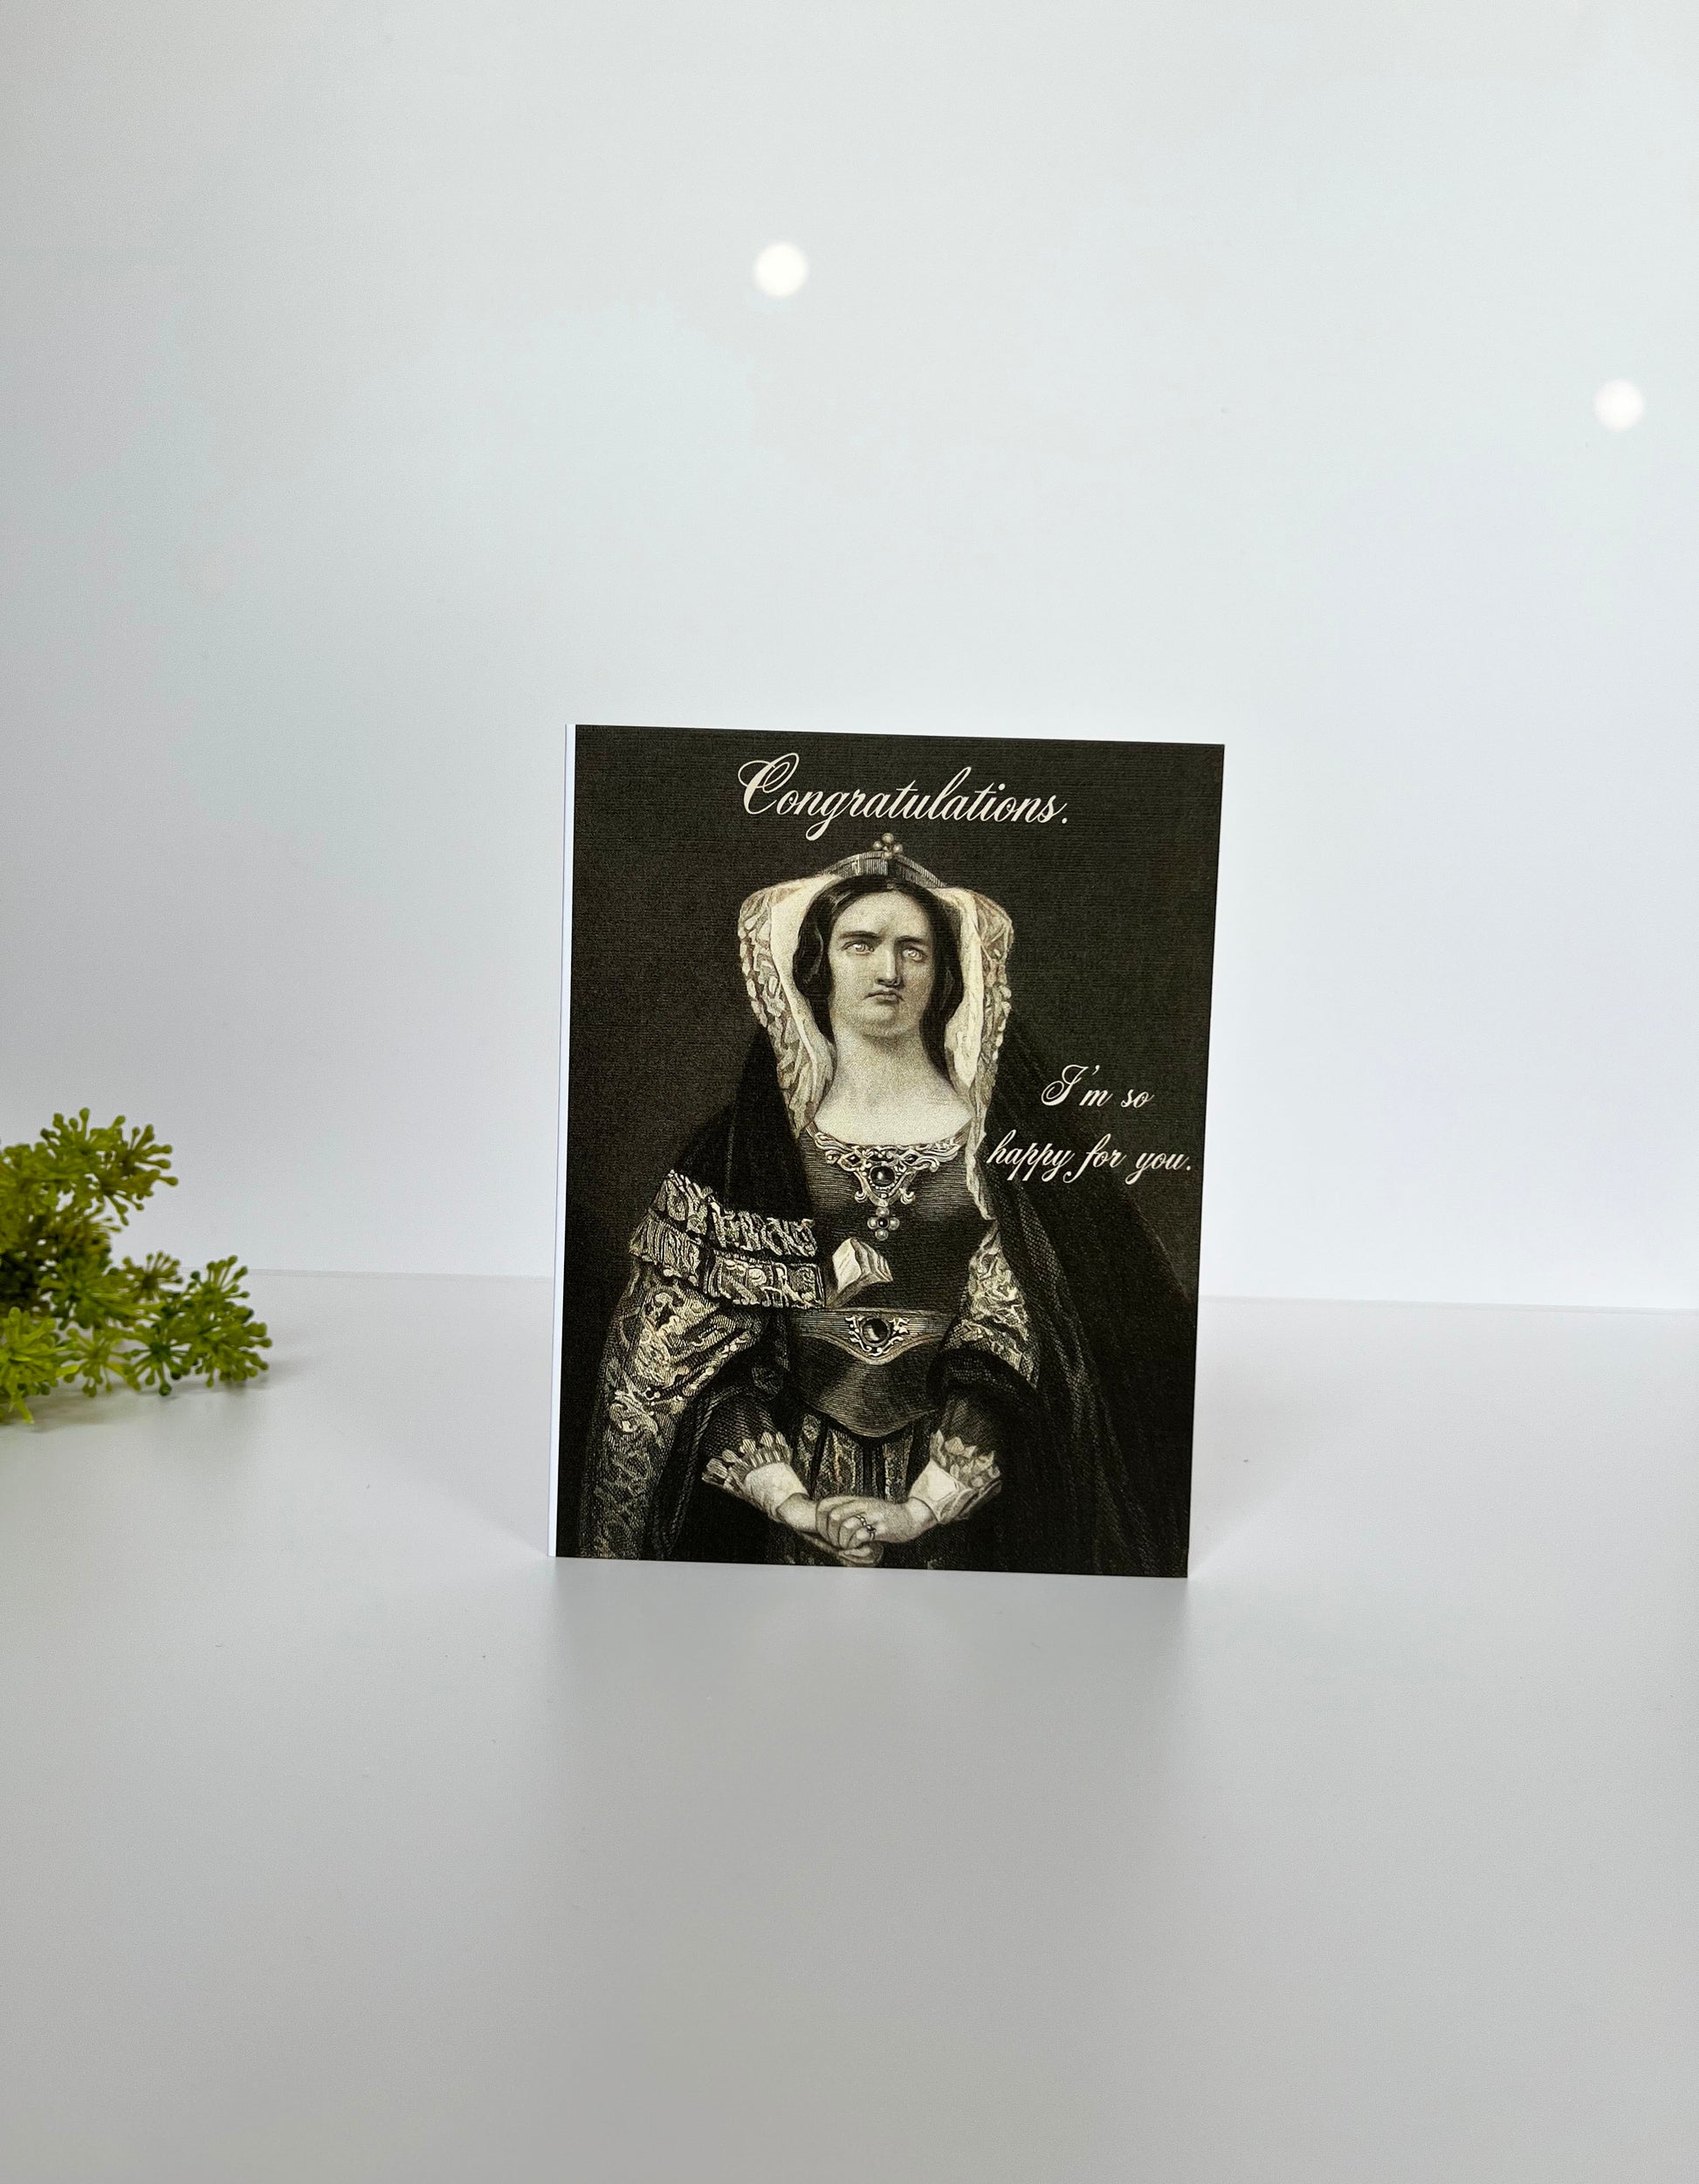 all occasion greeting note card sepia tone victorian woman funny graduation congrats promotion new baby engagement wedding moving goodbye silly resting bitch face queen hilarious snarky congratulations im so happy for you blank inside coin laundry 